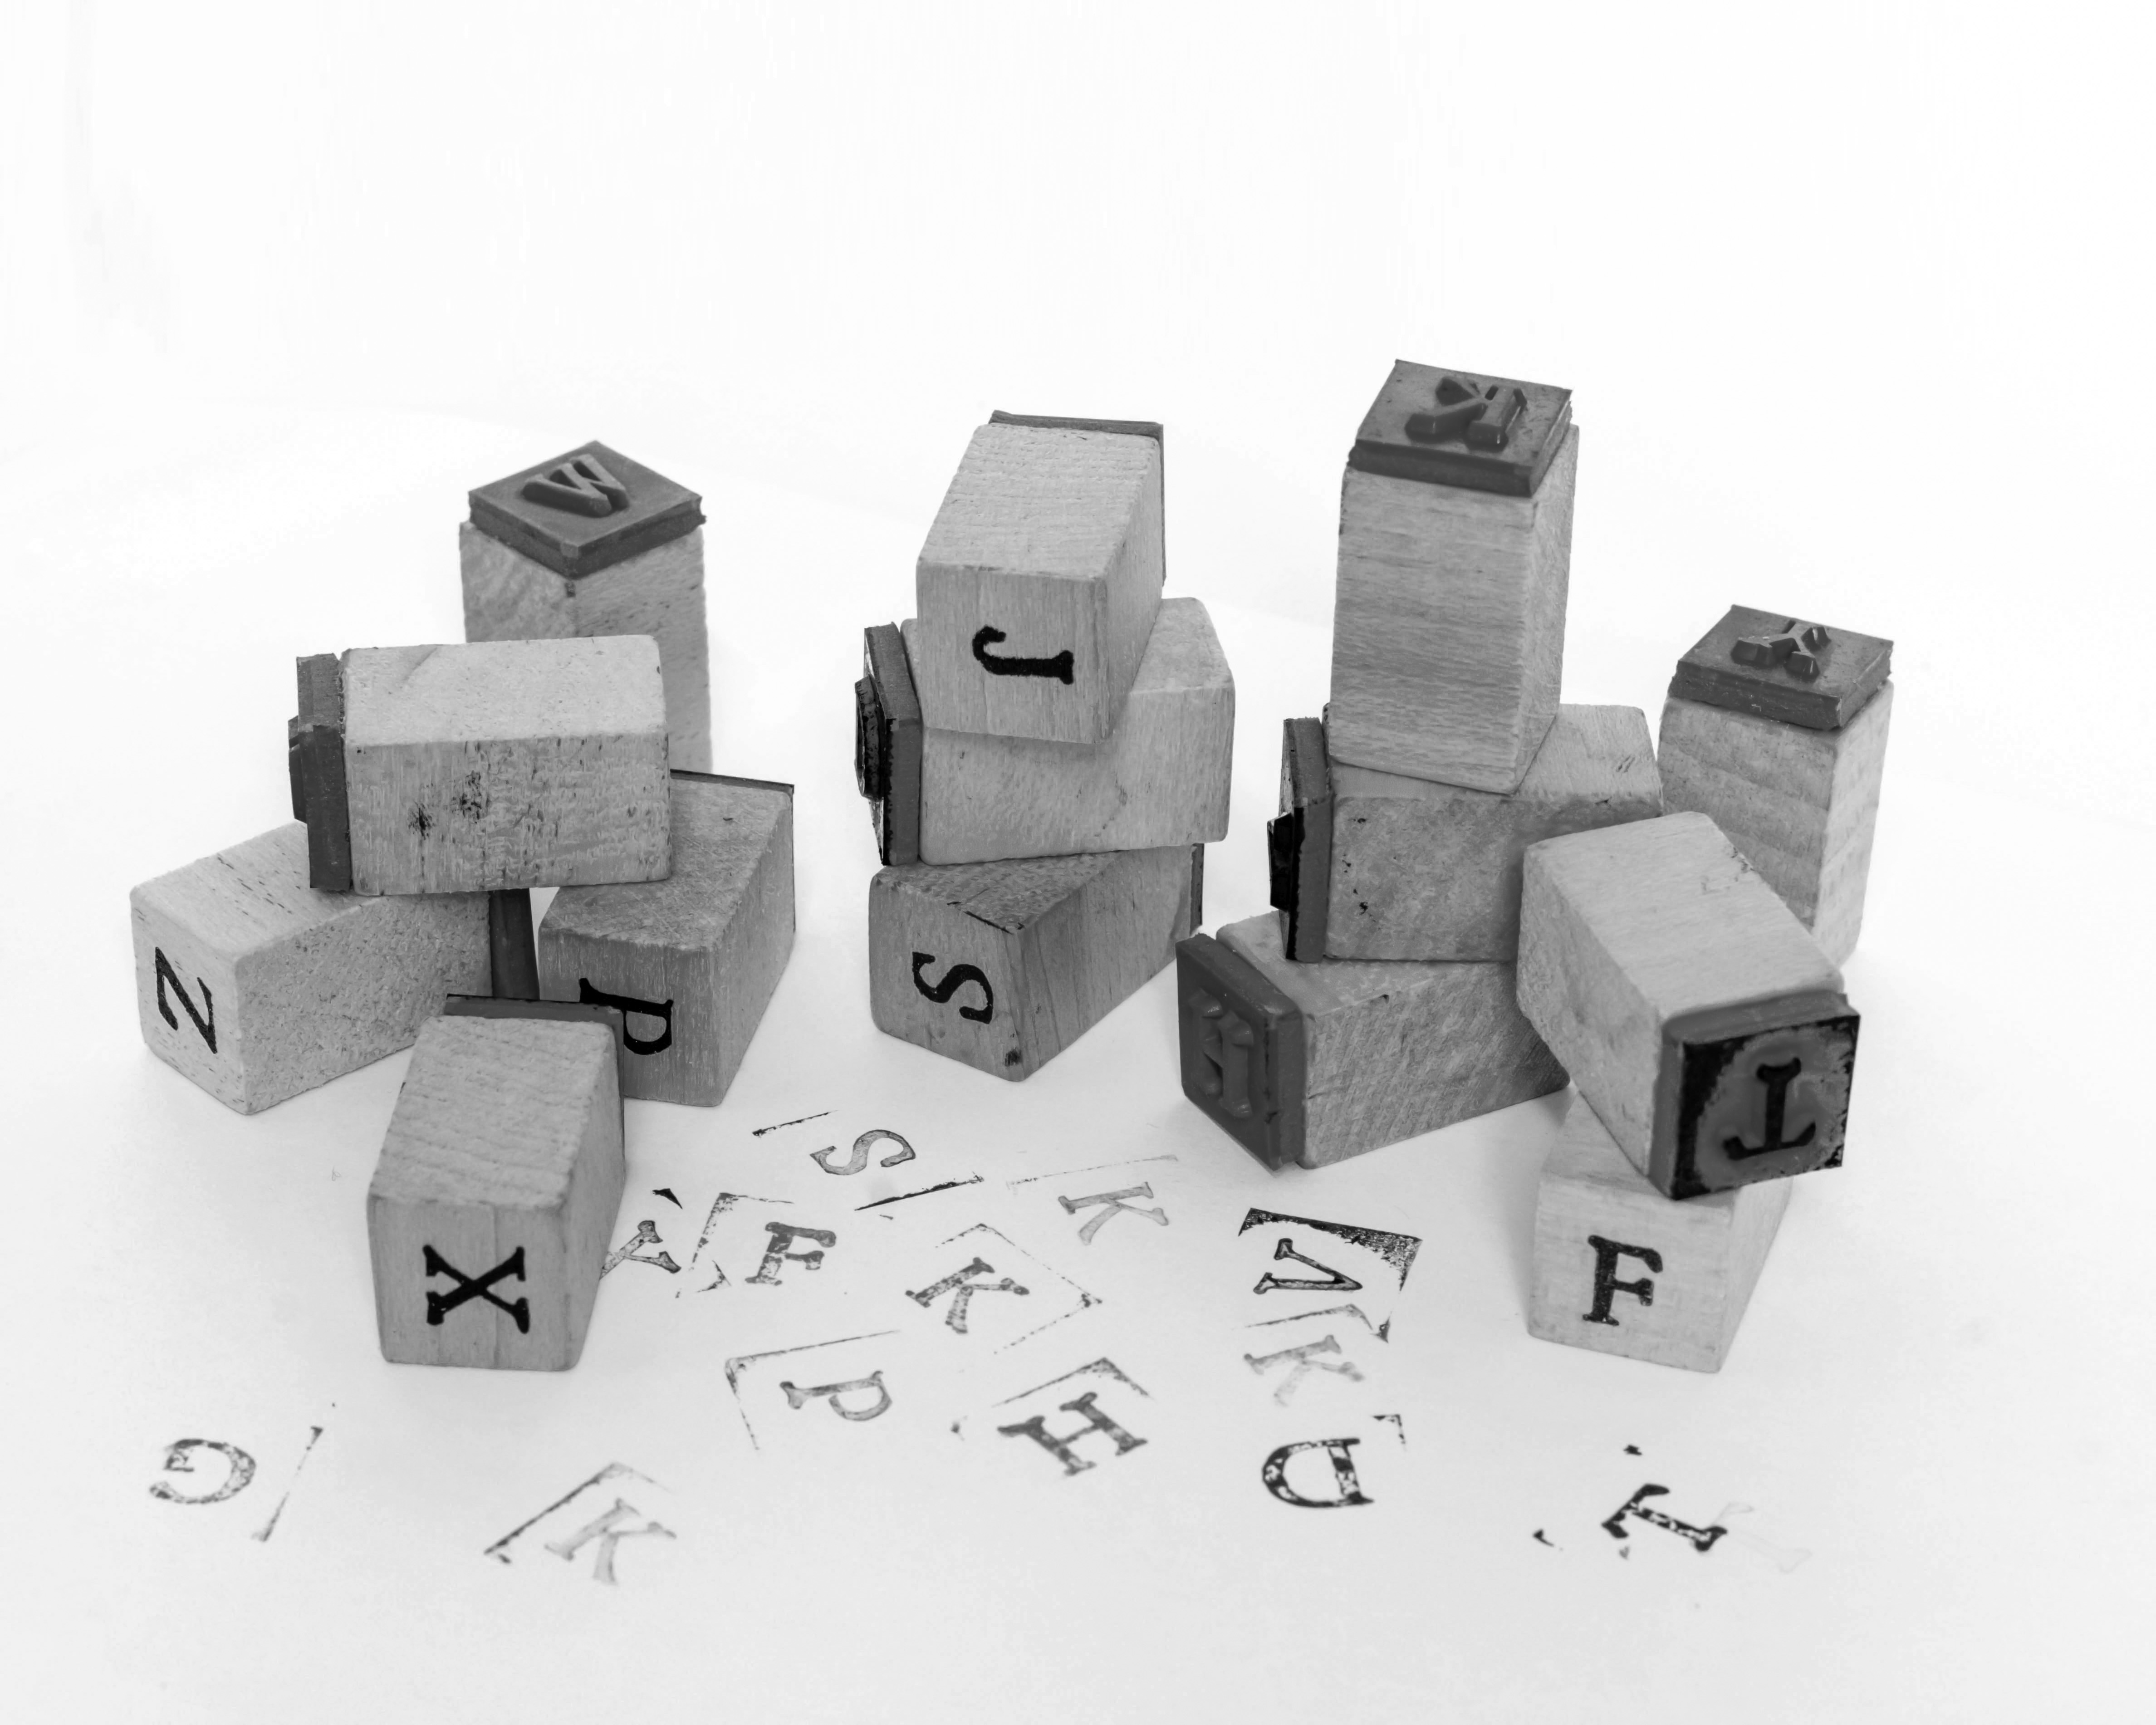 Rubber stamps of letters and imprints made by stamps